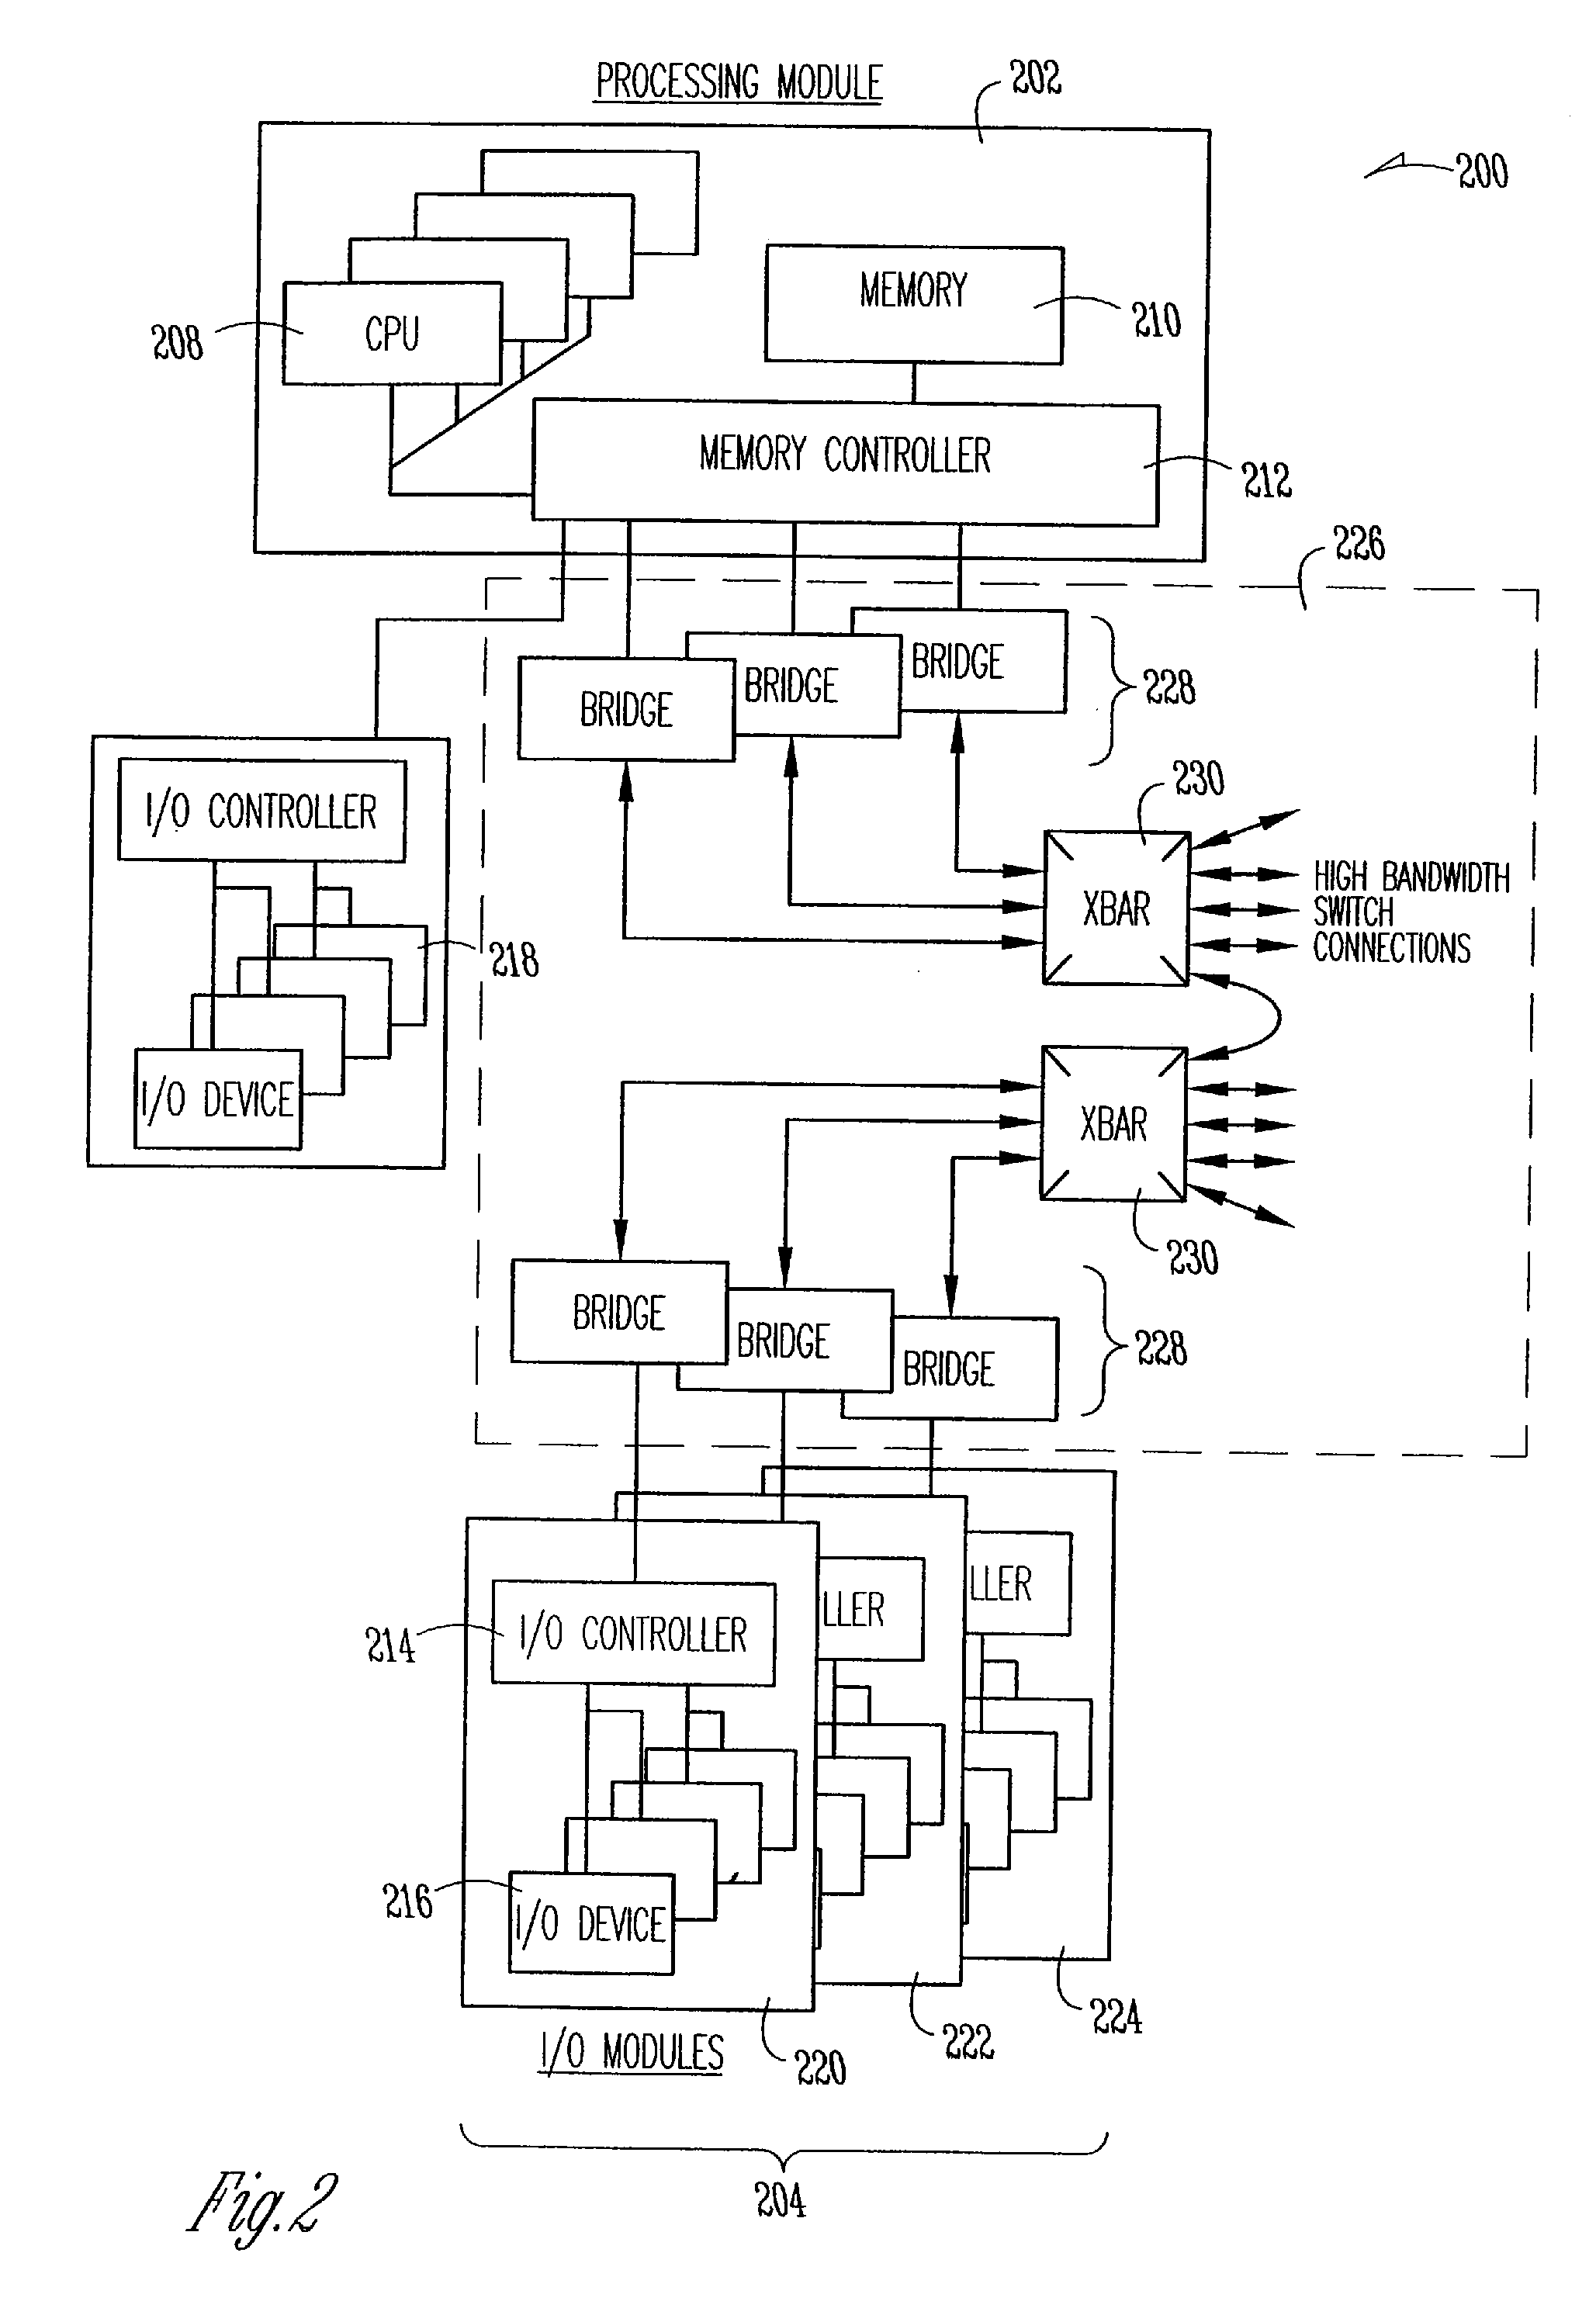 Scalable distributed memory and I/O multiprocessor systems and associated methods